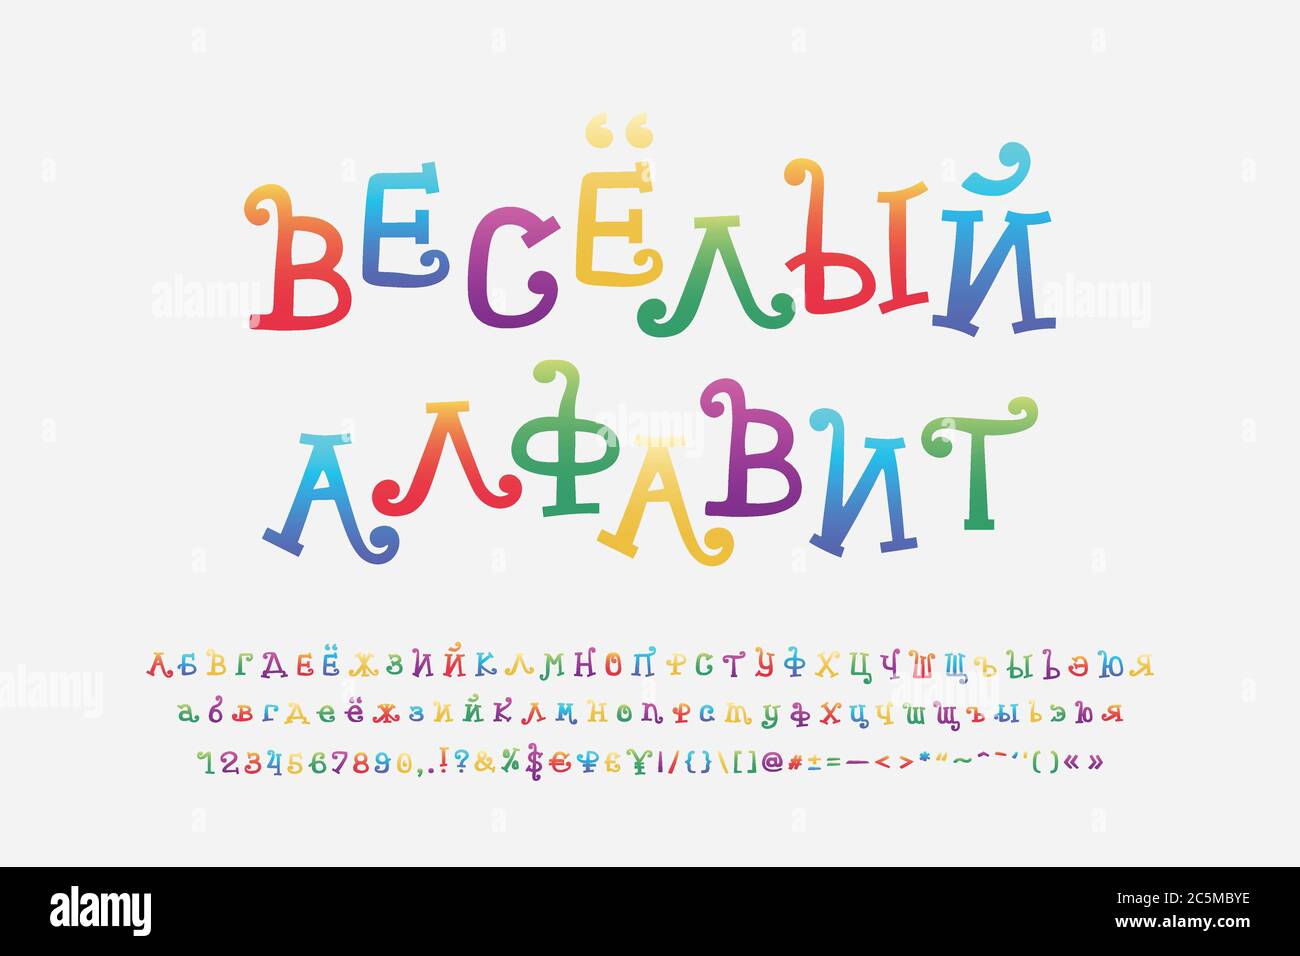 Colorful rainbow Cyrillic alphabet cartoon curly font. Russian text: Funny alphabet. Uppercase and lowercase letters, numbers, punctuation marks. Vect Stock Vector